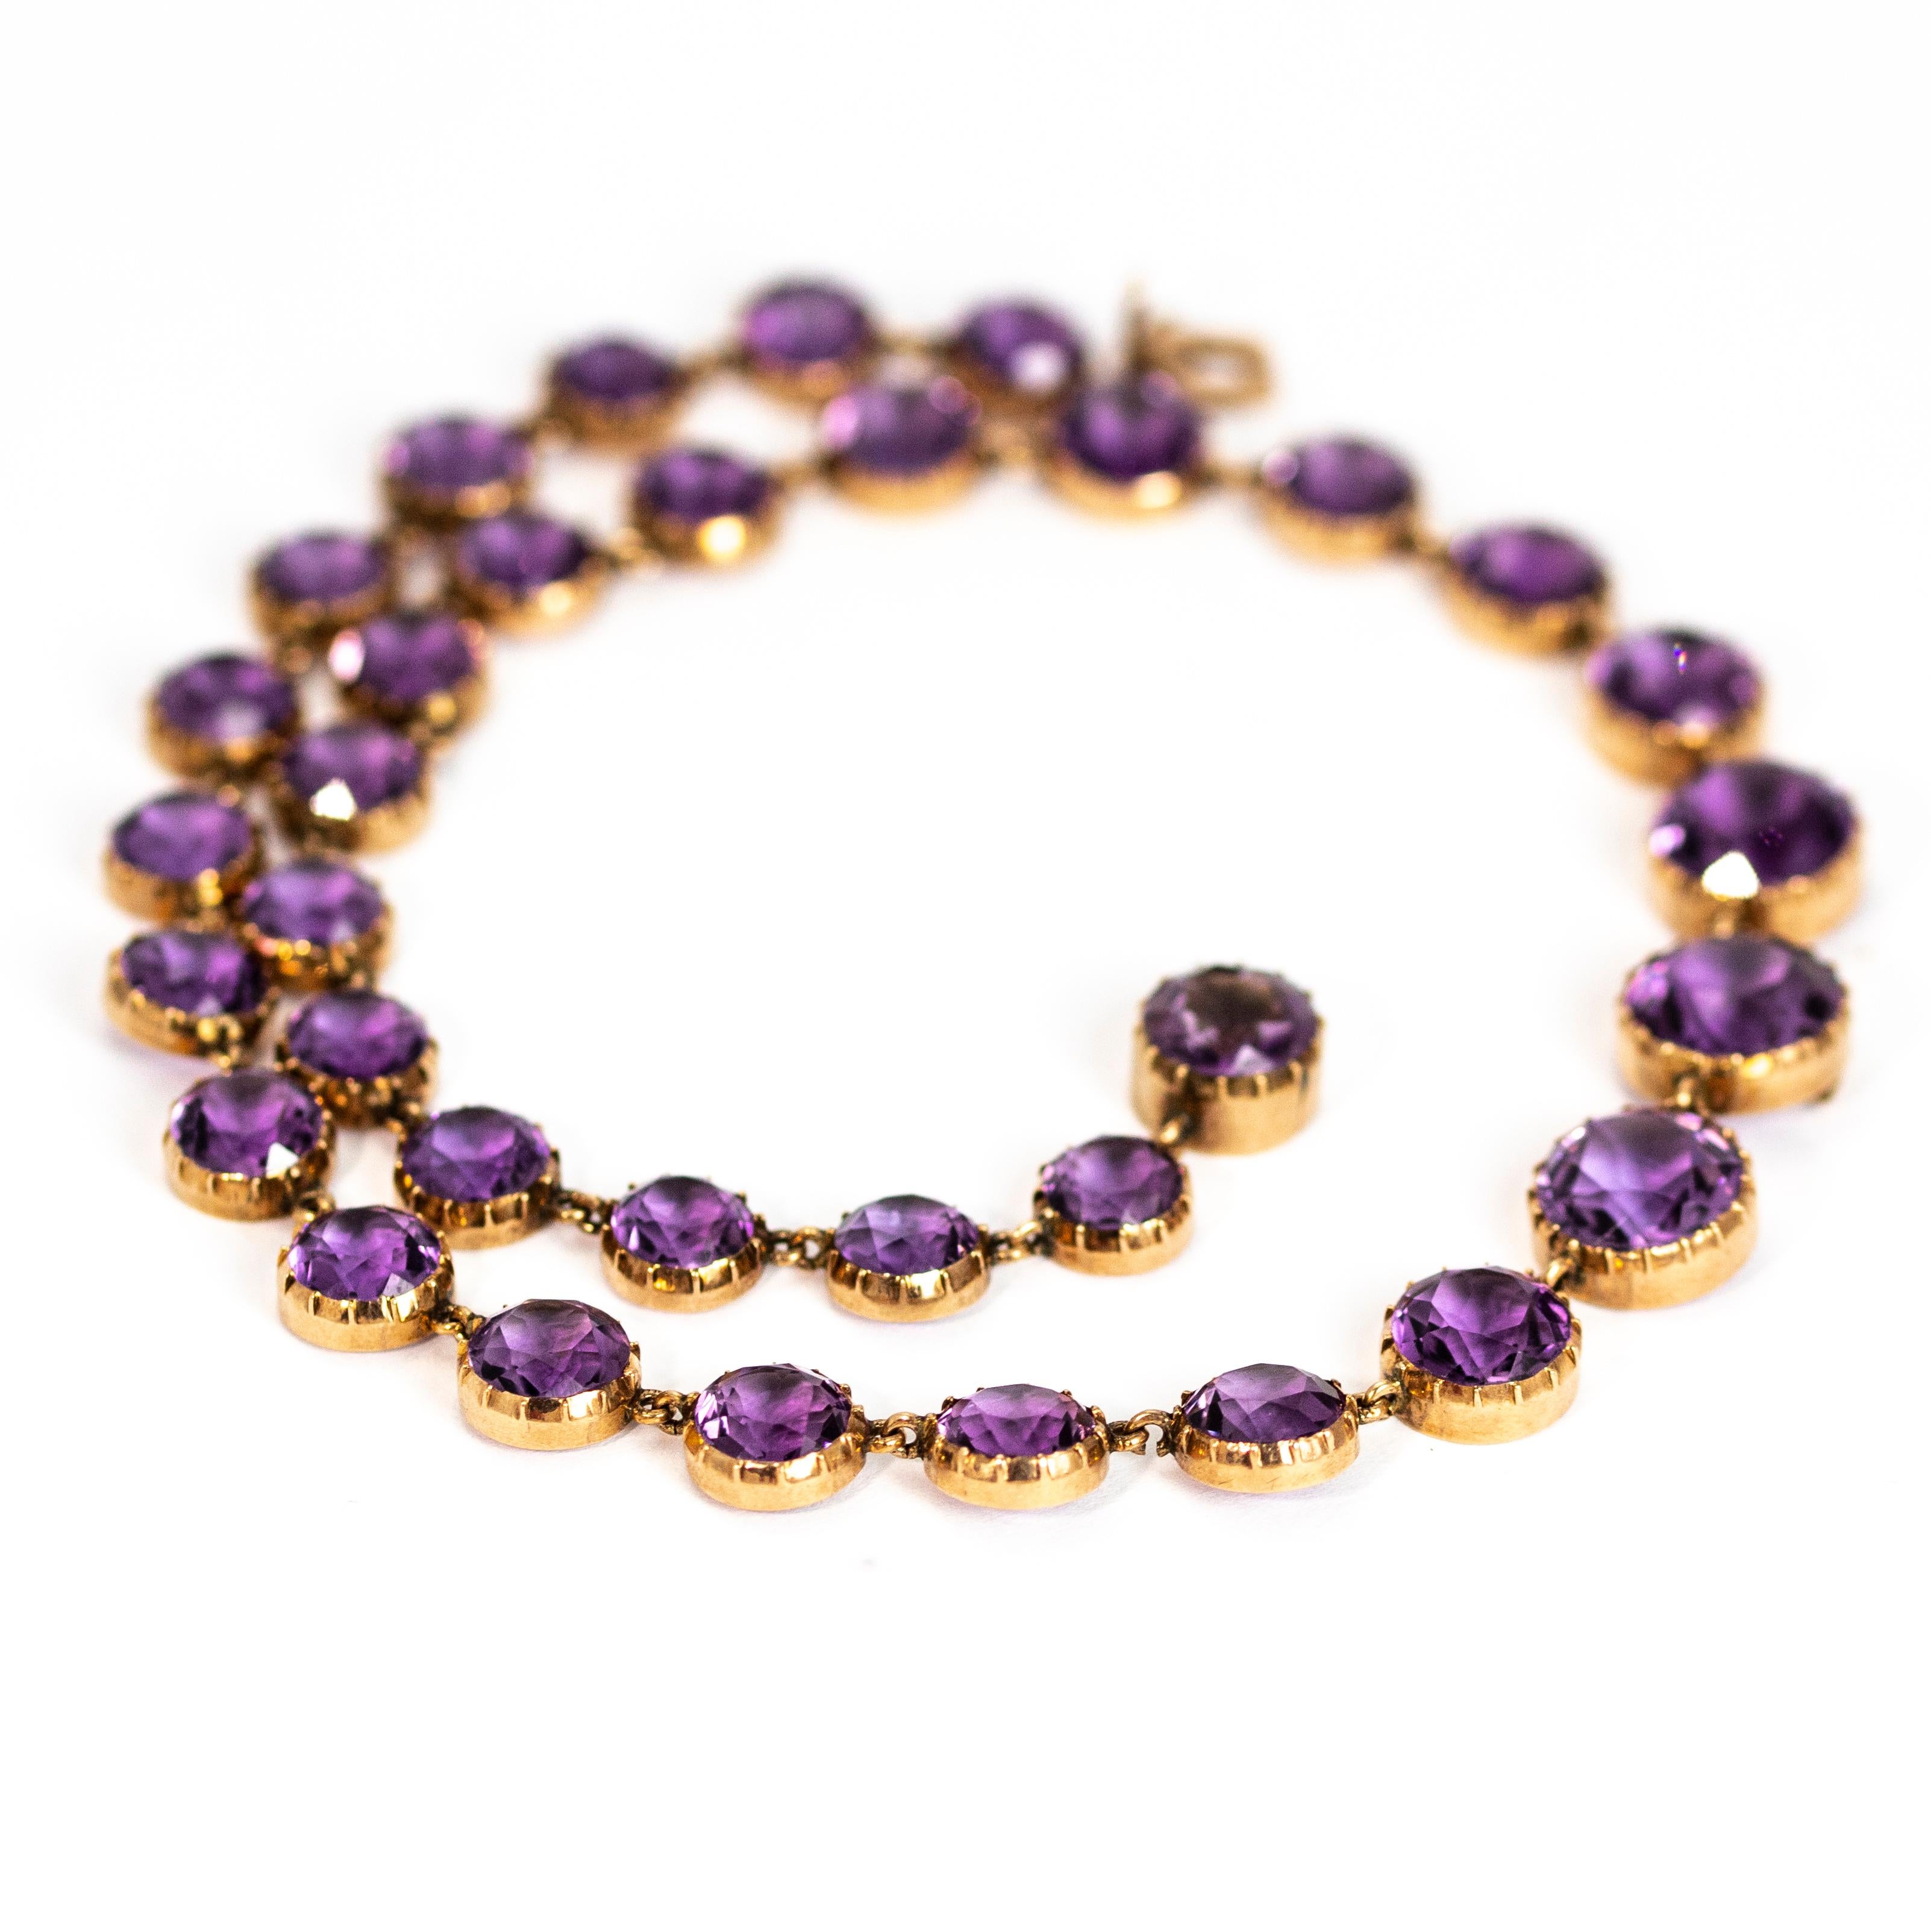 Victorian 9 Carat Gold Amethyst Riviere Necklace 2